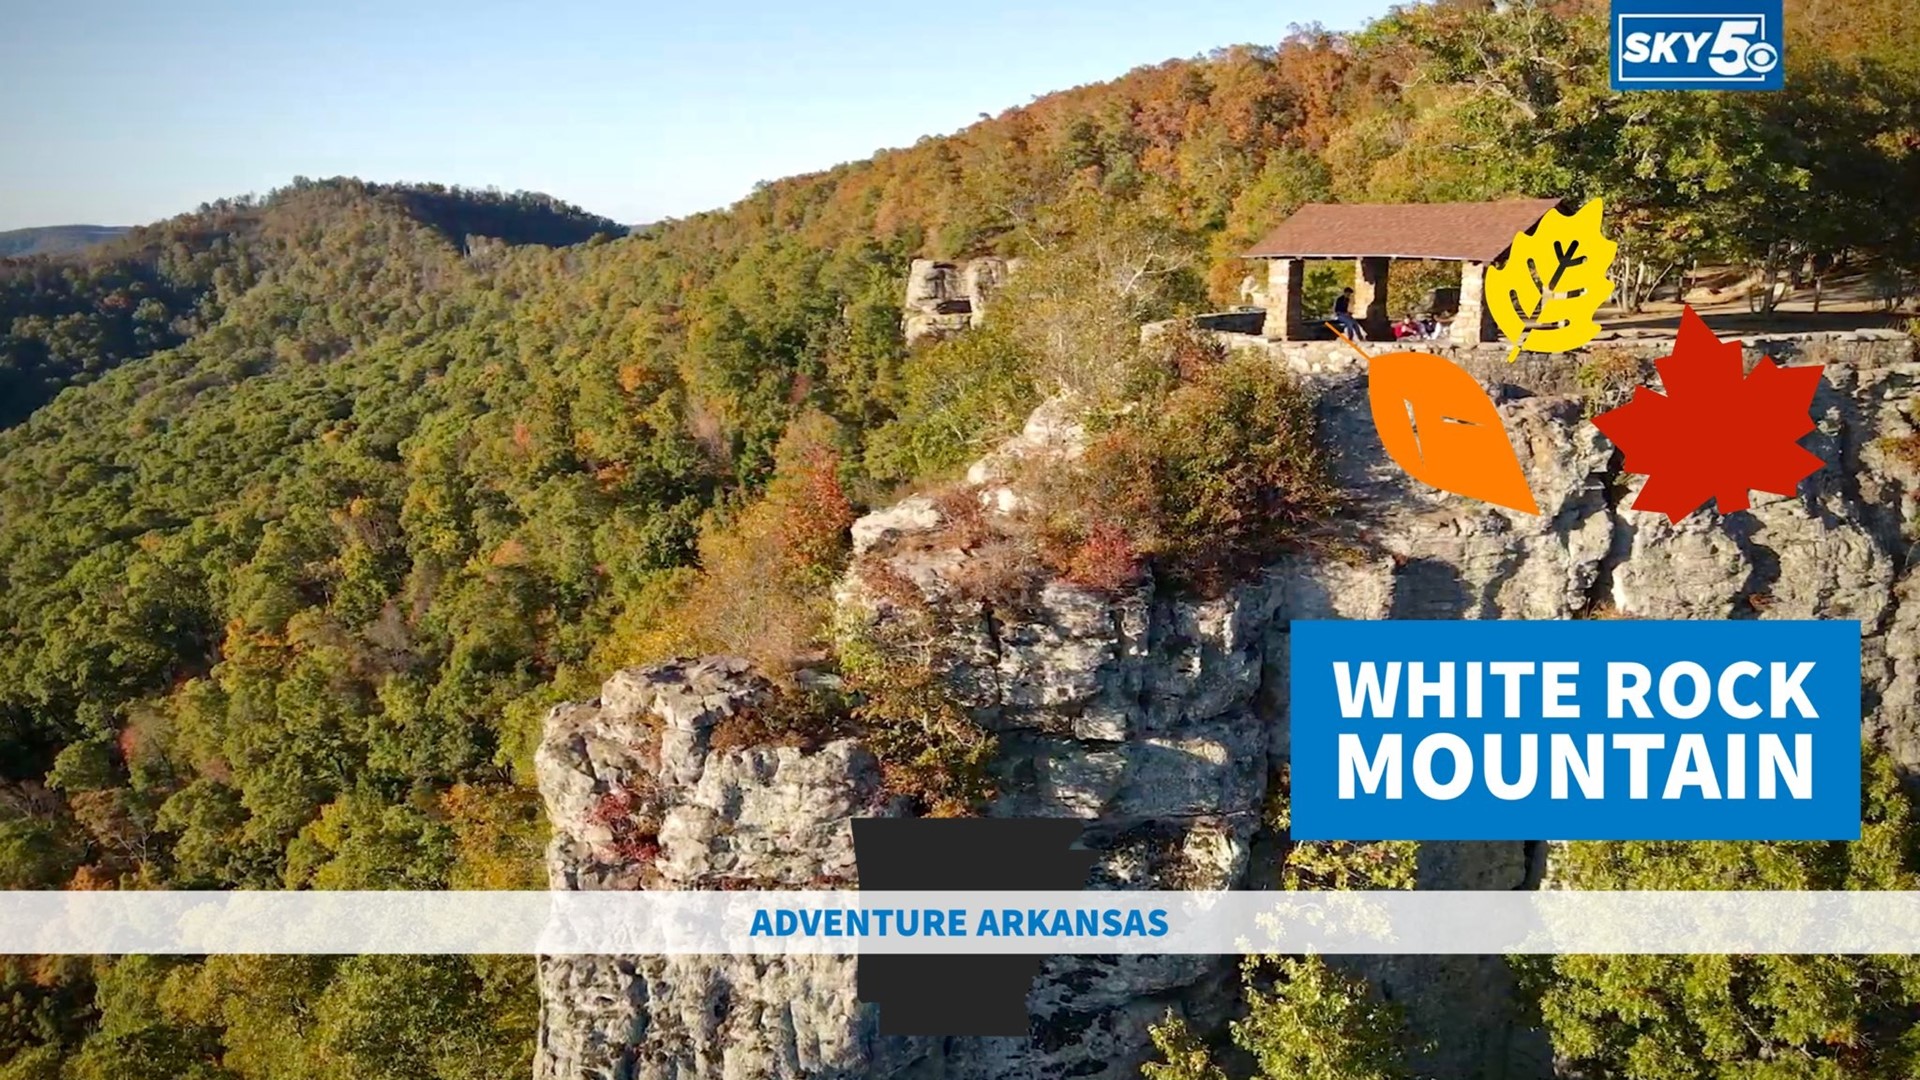 Fall leaves are at peak across Arkansas and Oklahoma. We are launching from one of the highest points in the Natural State to get a bird's eye view of the colors.